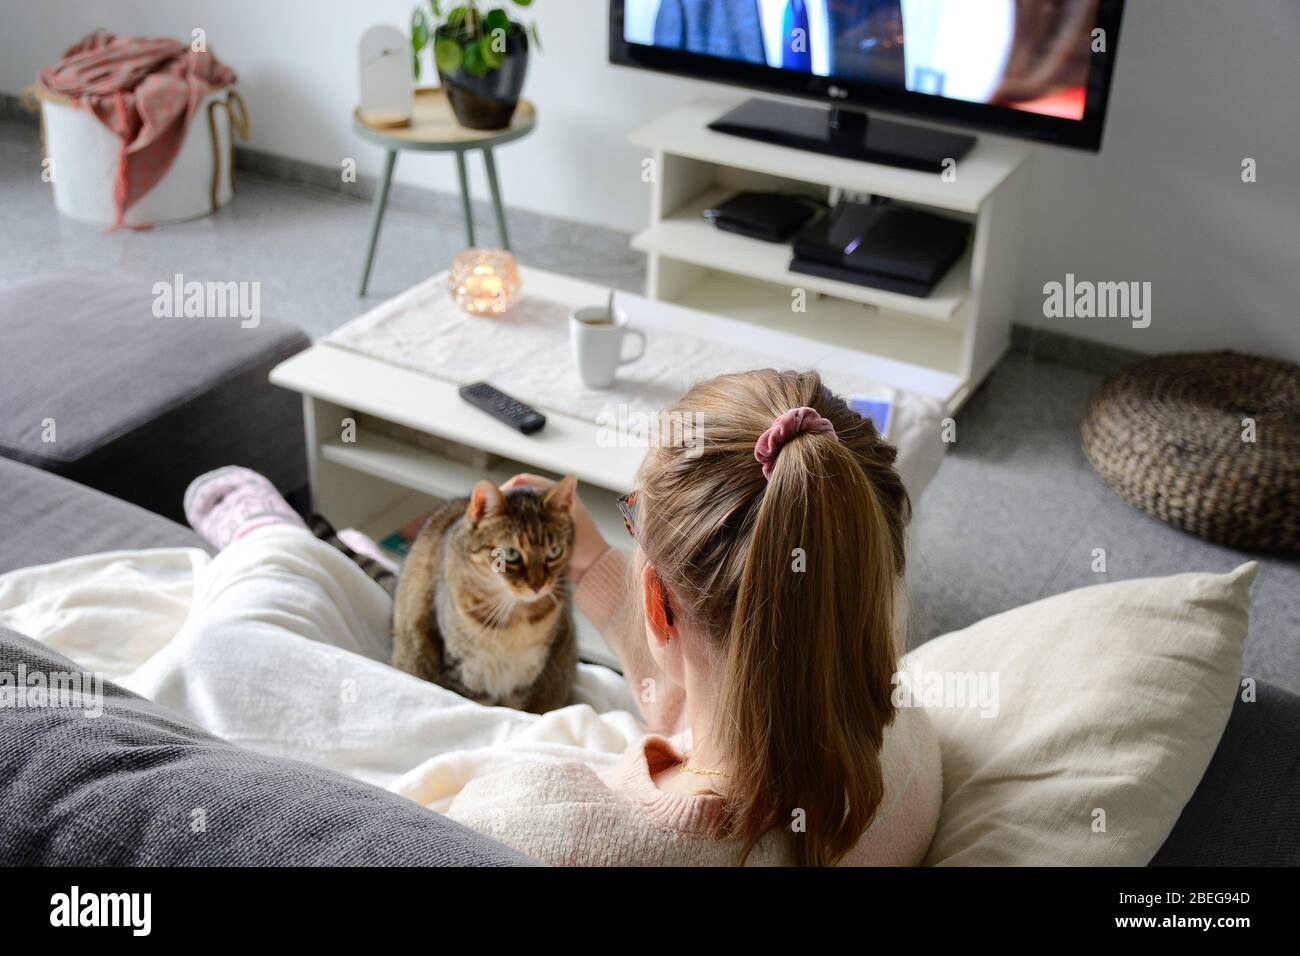 Domestic life with pet at home. Young woman is sitting on the couch in living room with her cat. She watches TV while stroking her cat. Binge watching Stock Photo